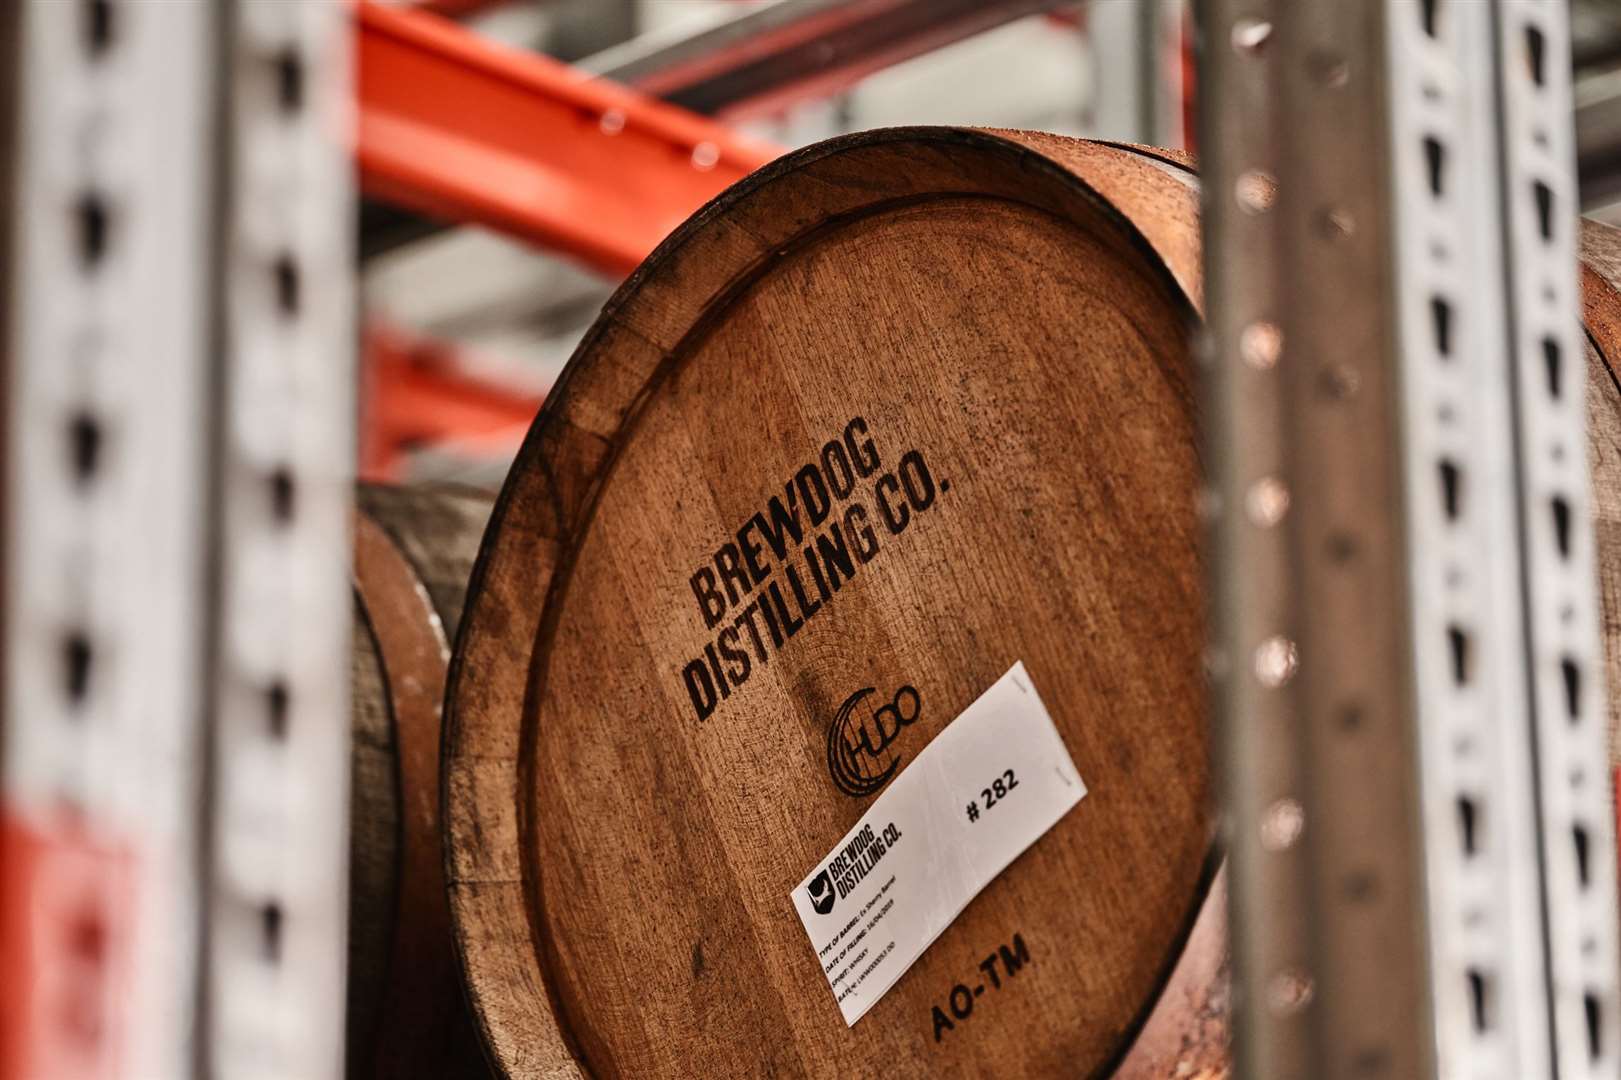 BrewDog Distilling Co. will release its first ever rum casks for sale.